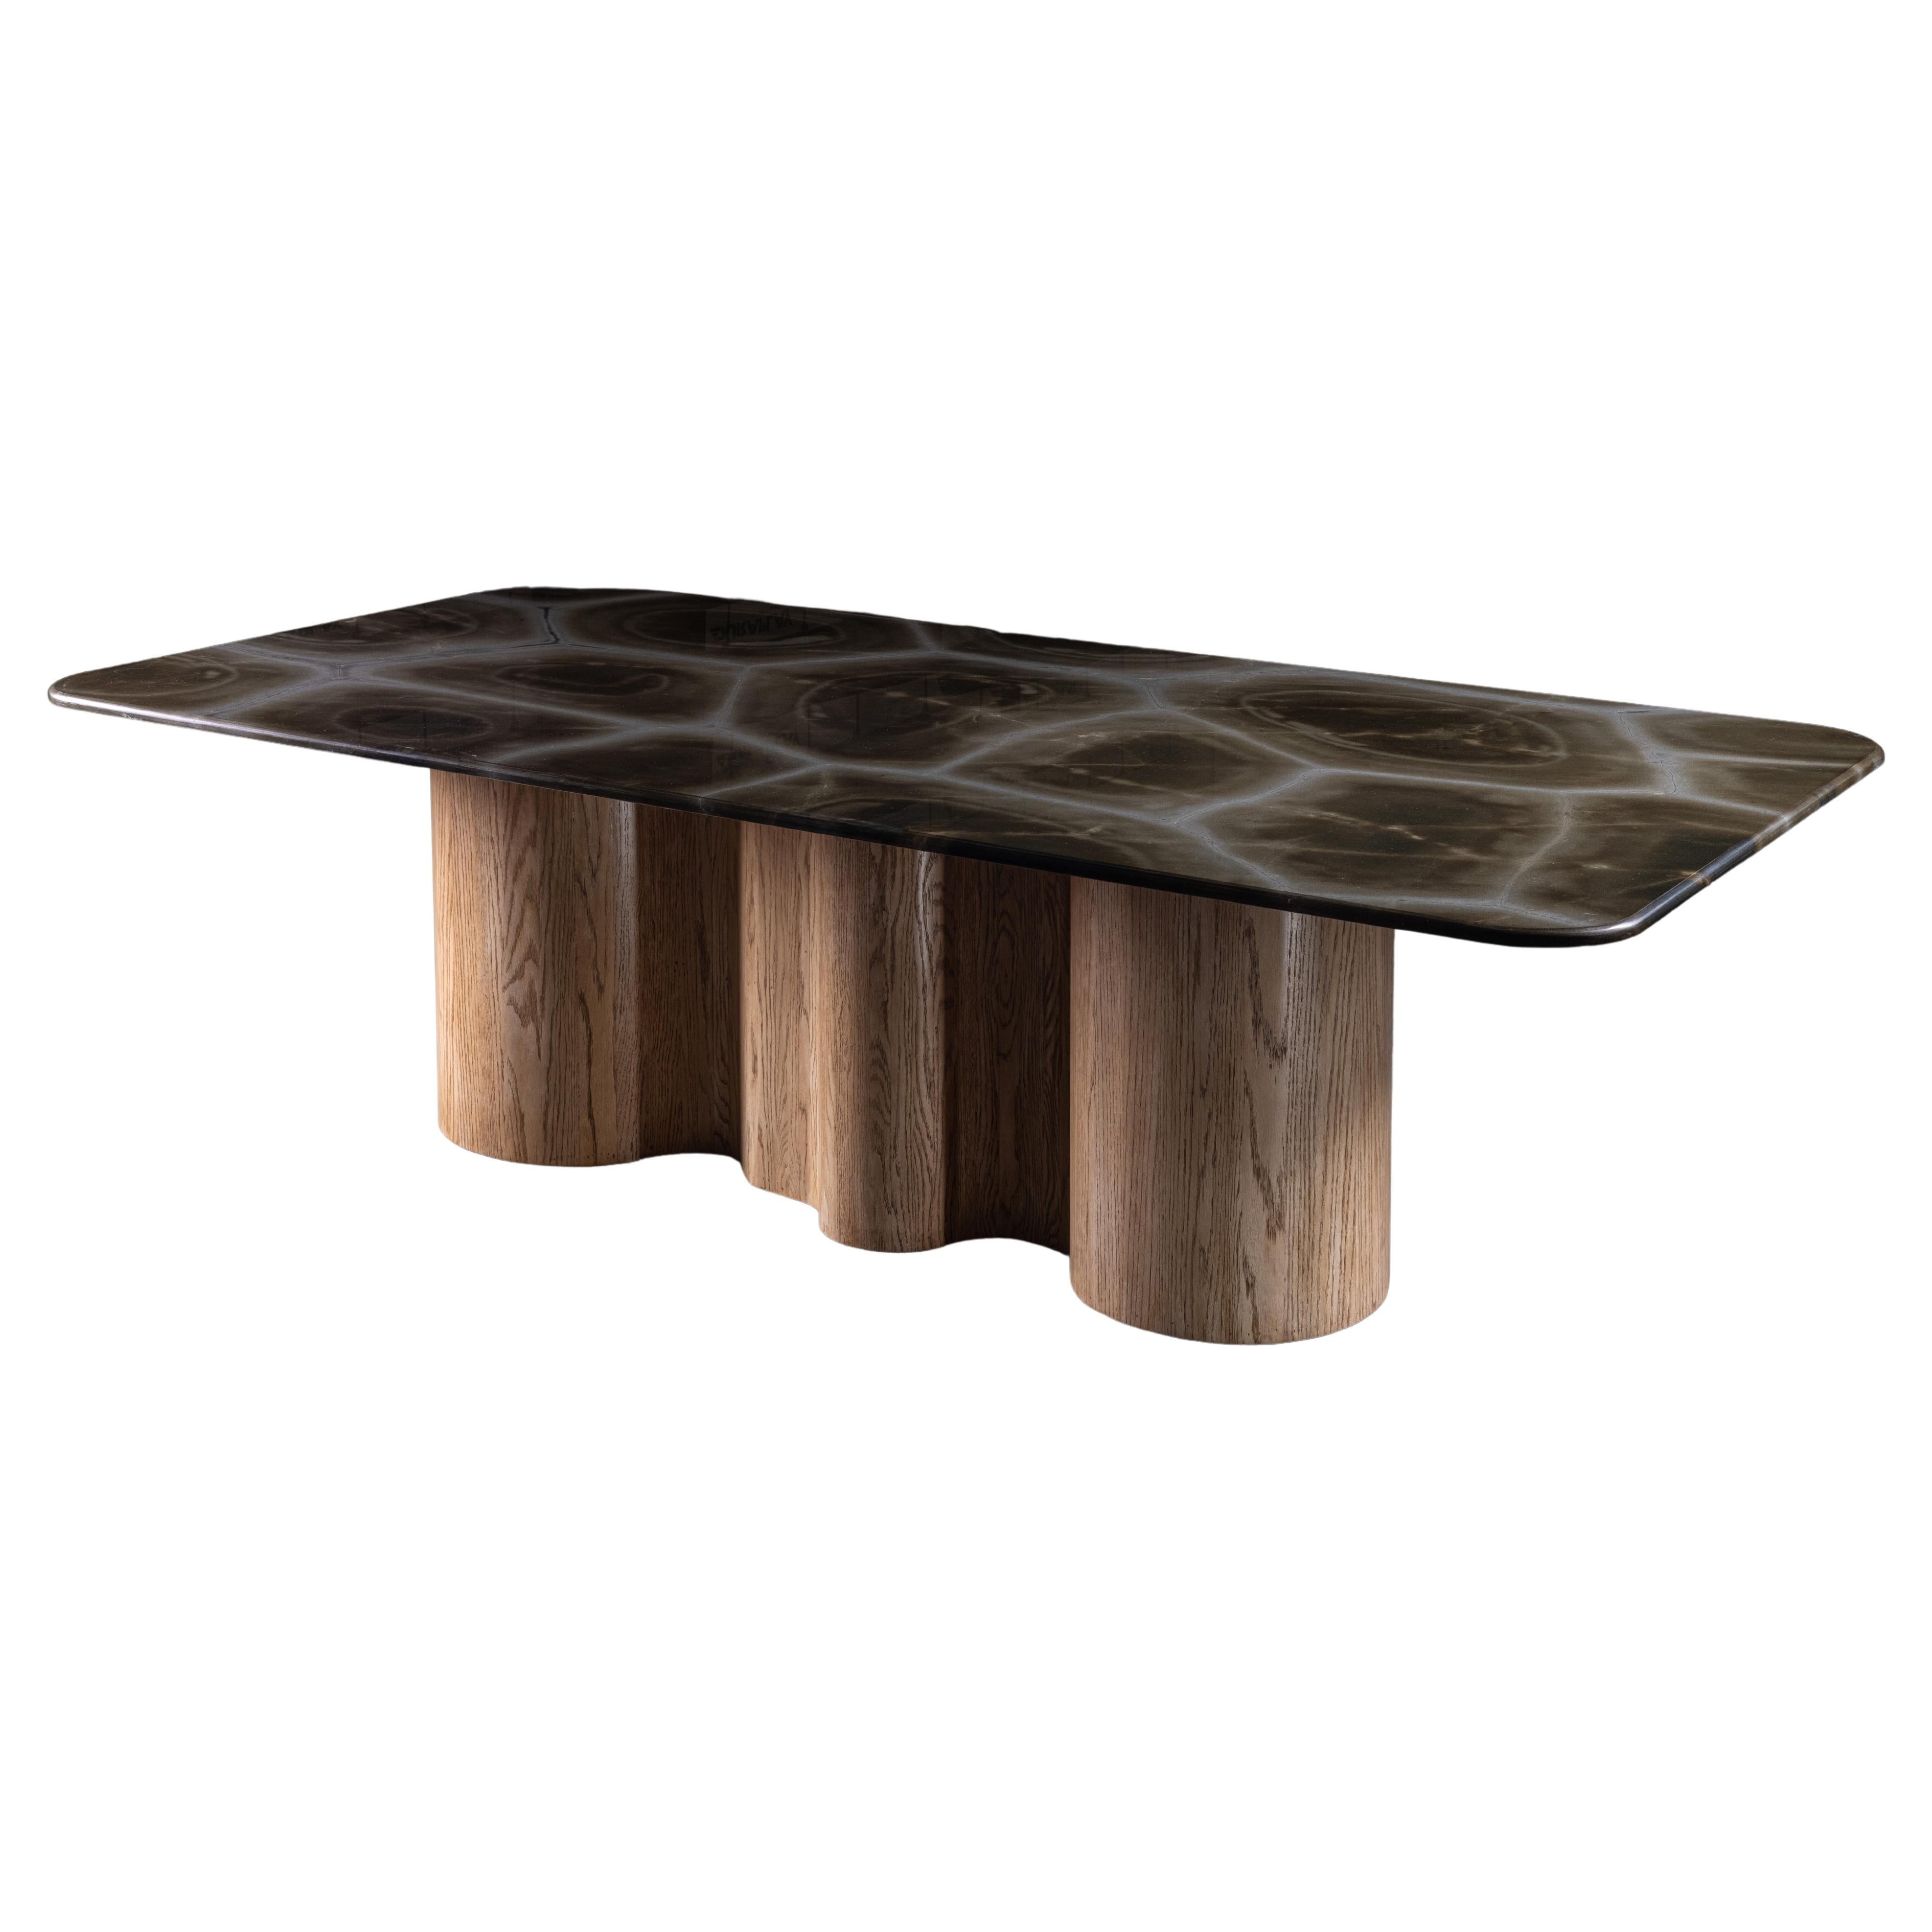 024 Dining Table, Quartzite Top with Solid Oak Organic Shape Base